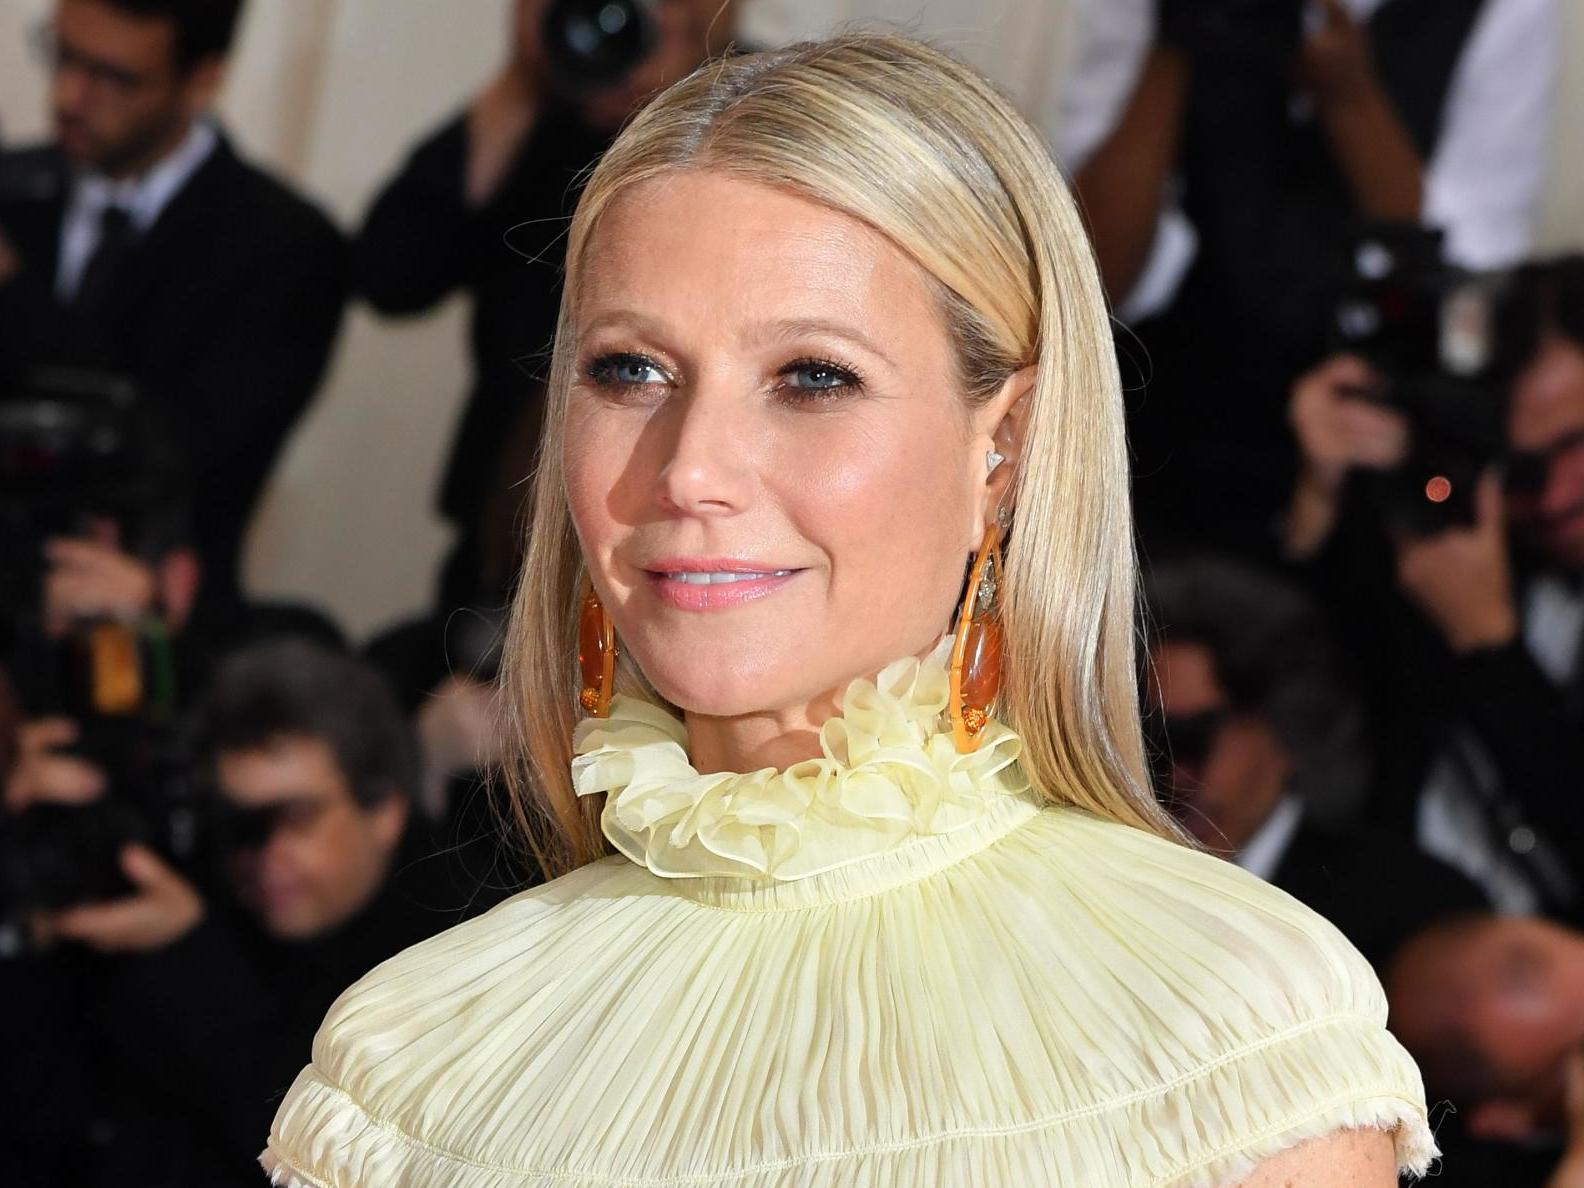 Gwyneth Paltrow: Goop founder used $1,000 worth of beauty products